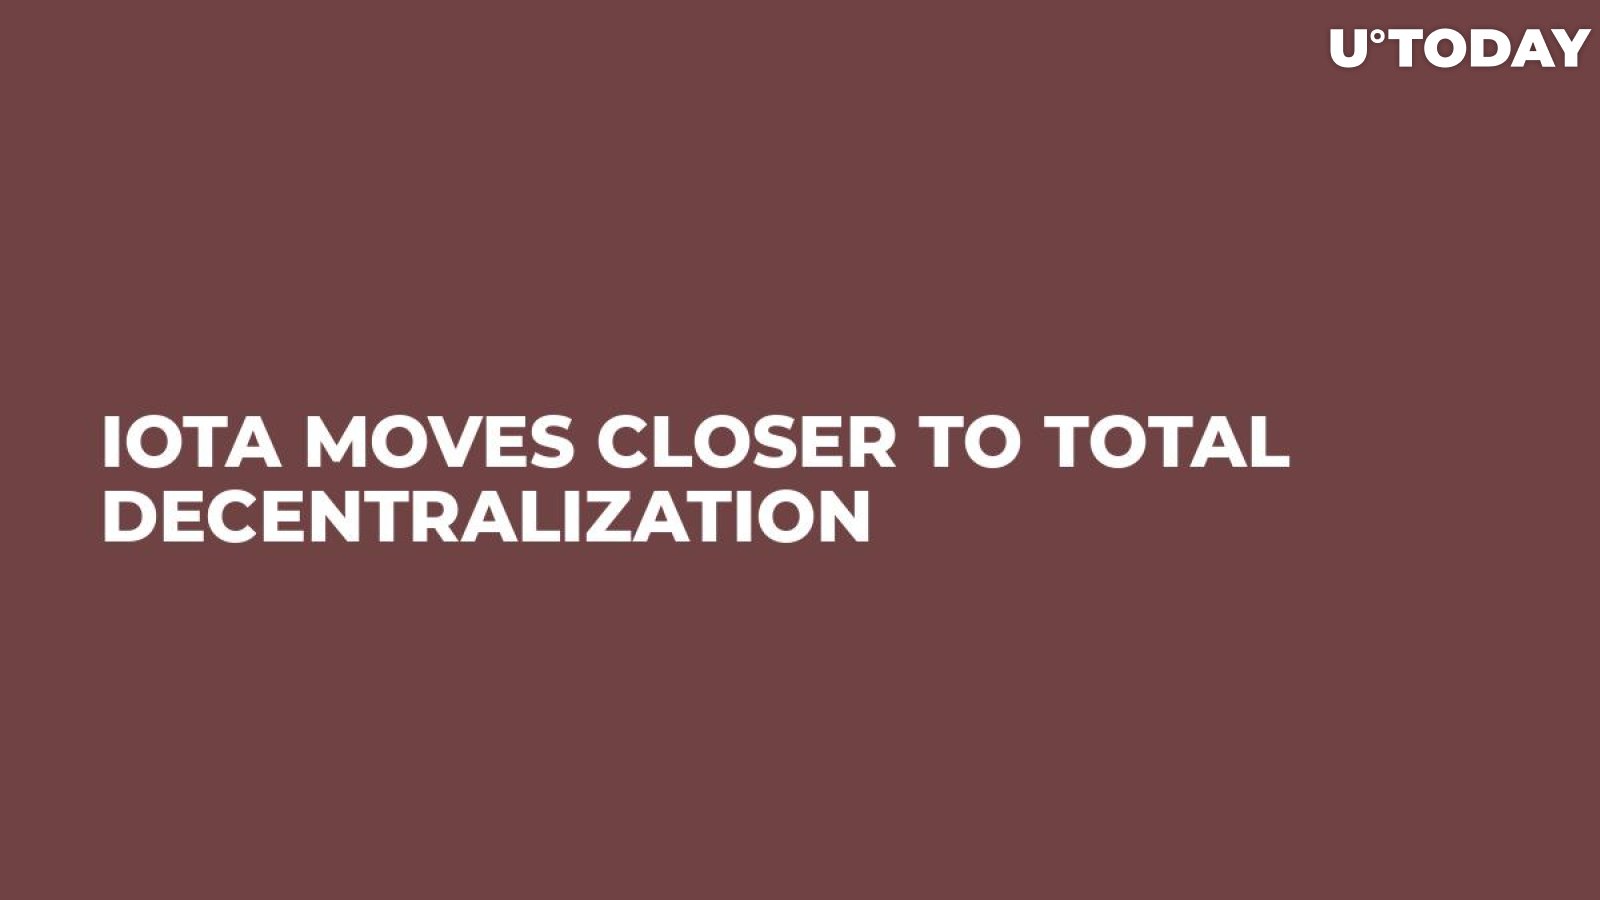 IOTA Moves Closer to Total Decentralization